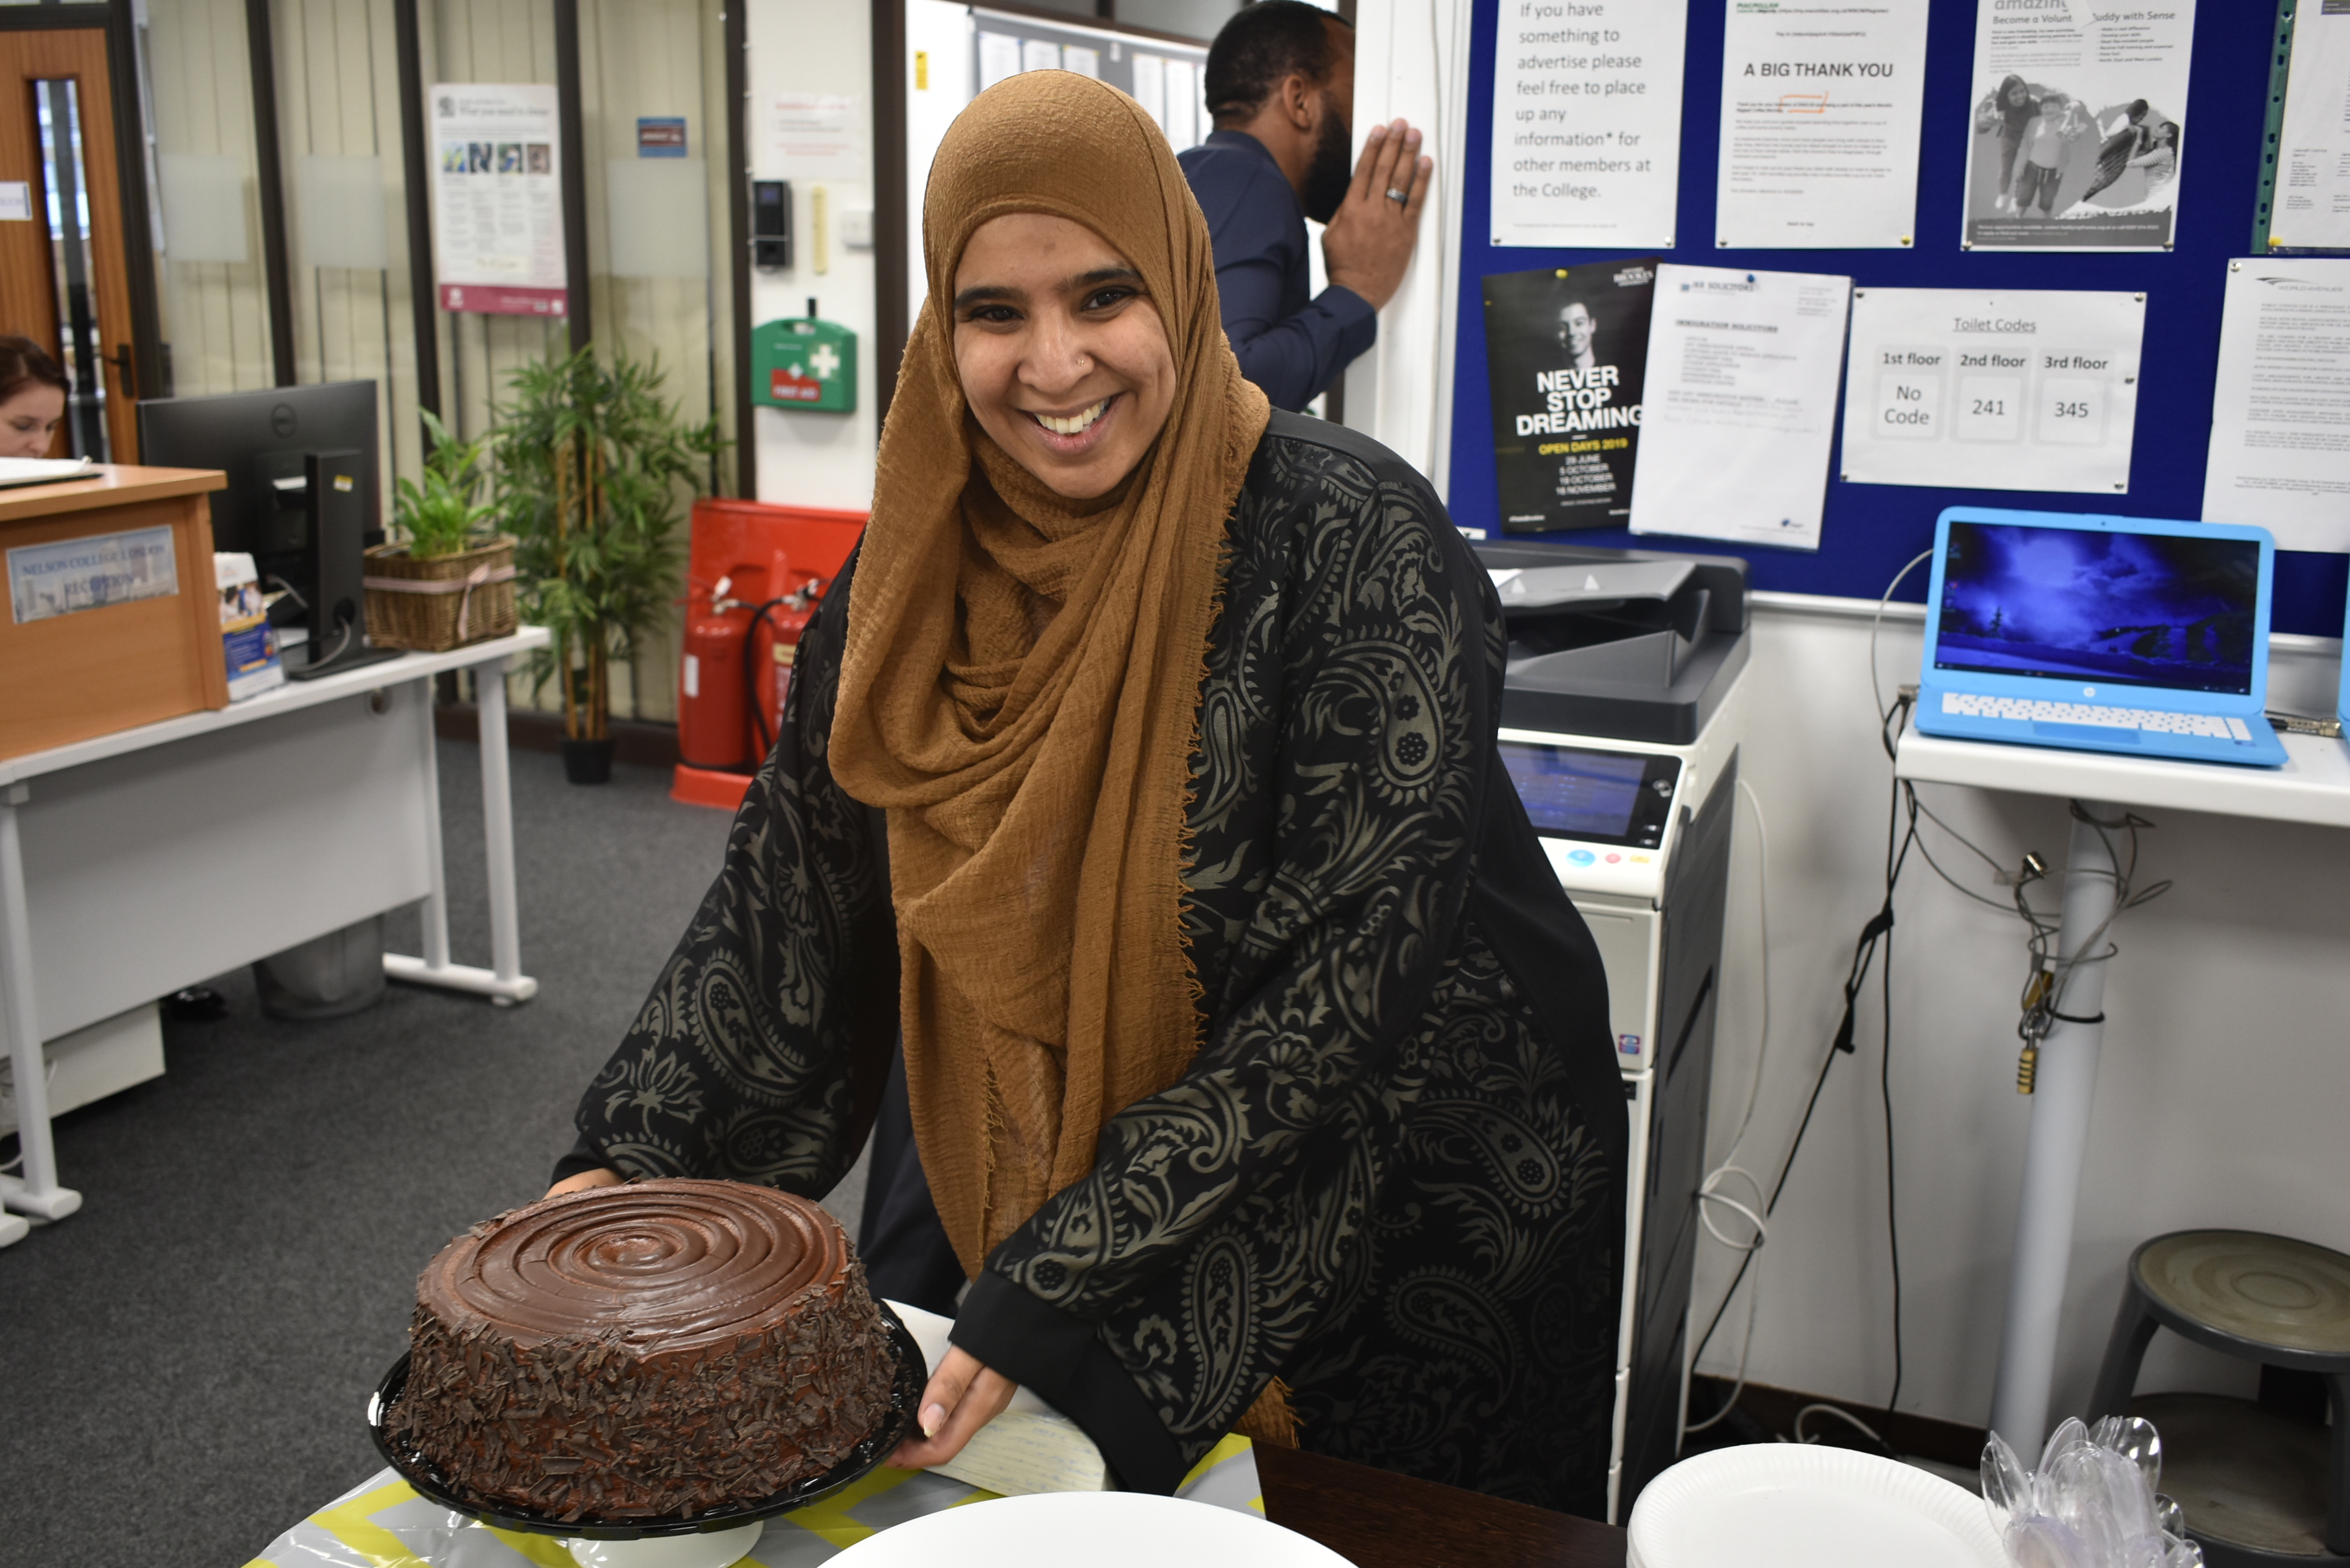 cake is being shown by Nazia Hussain